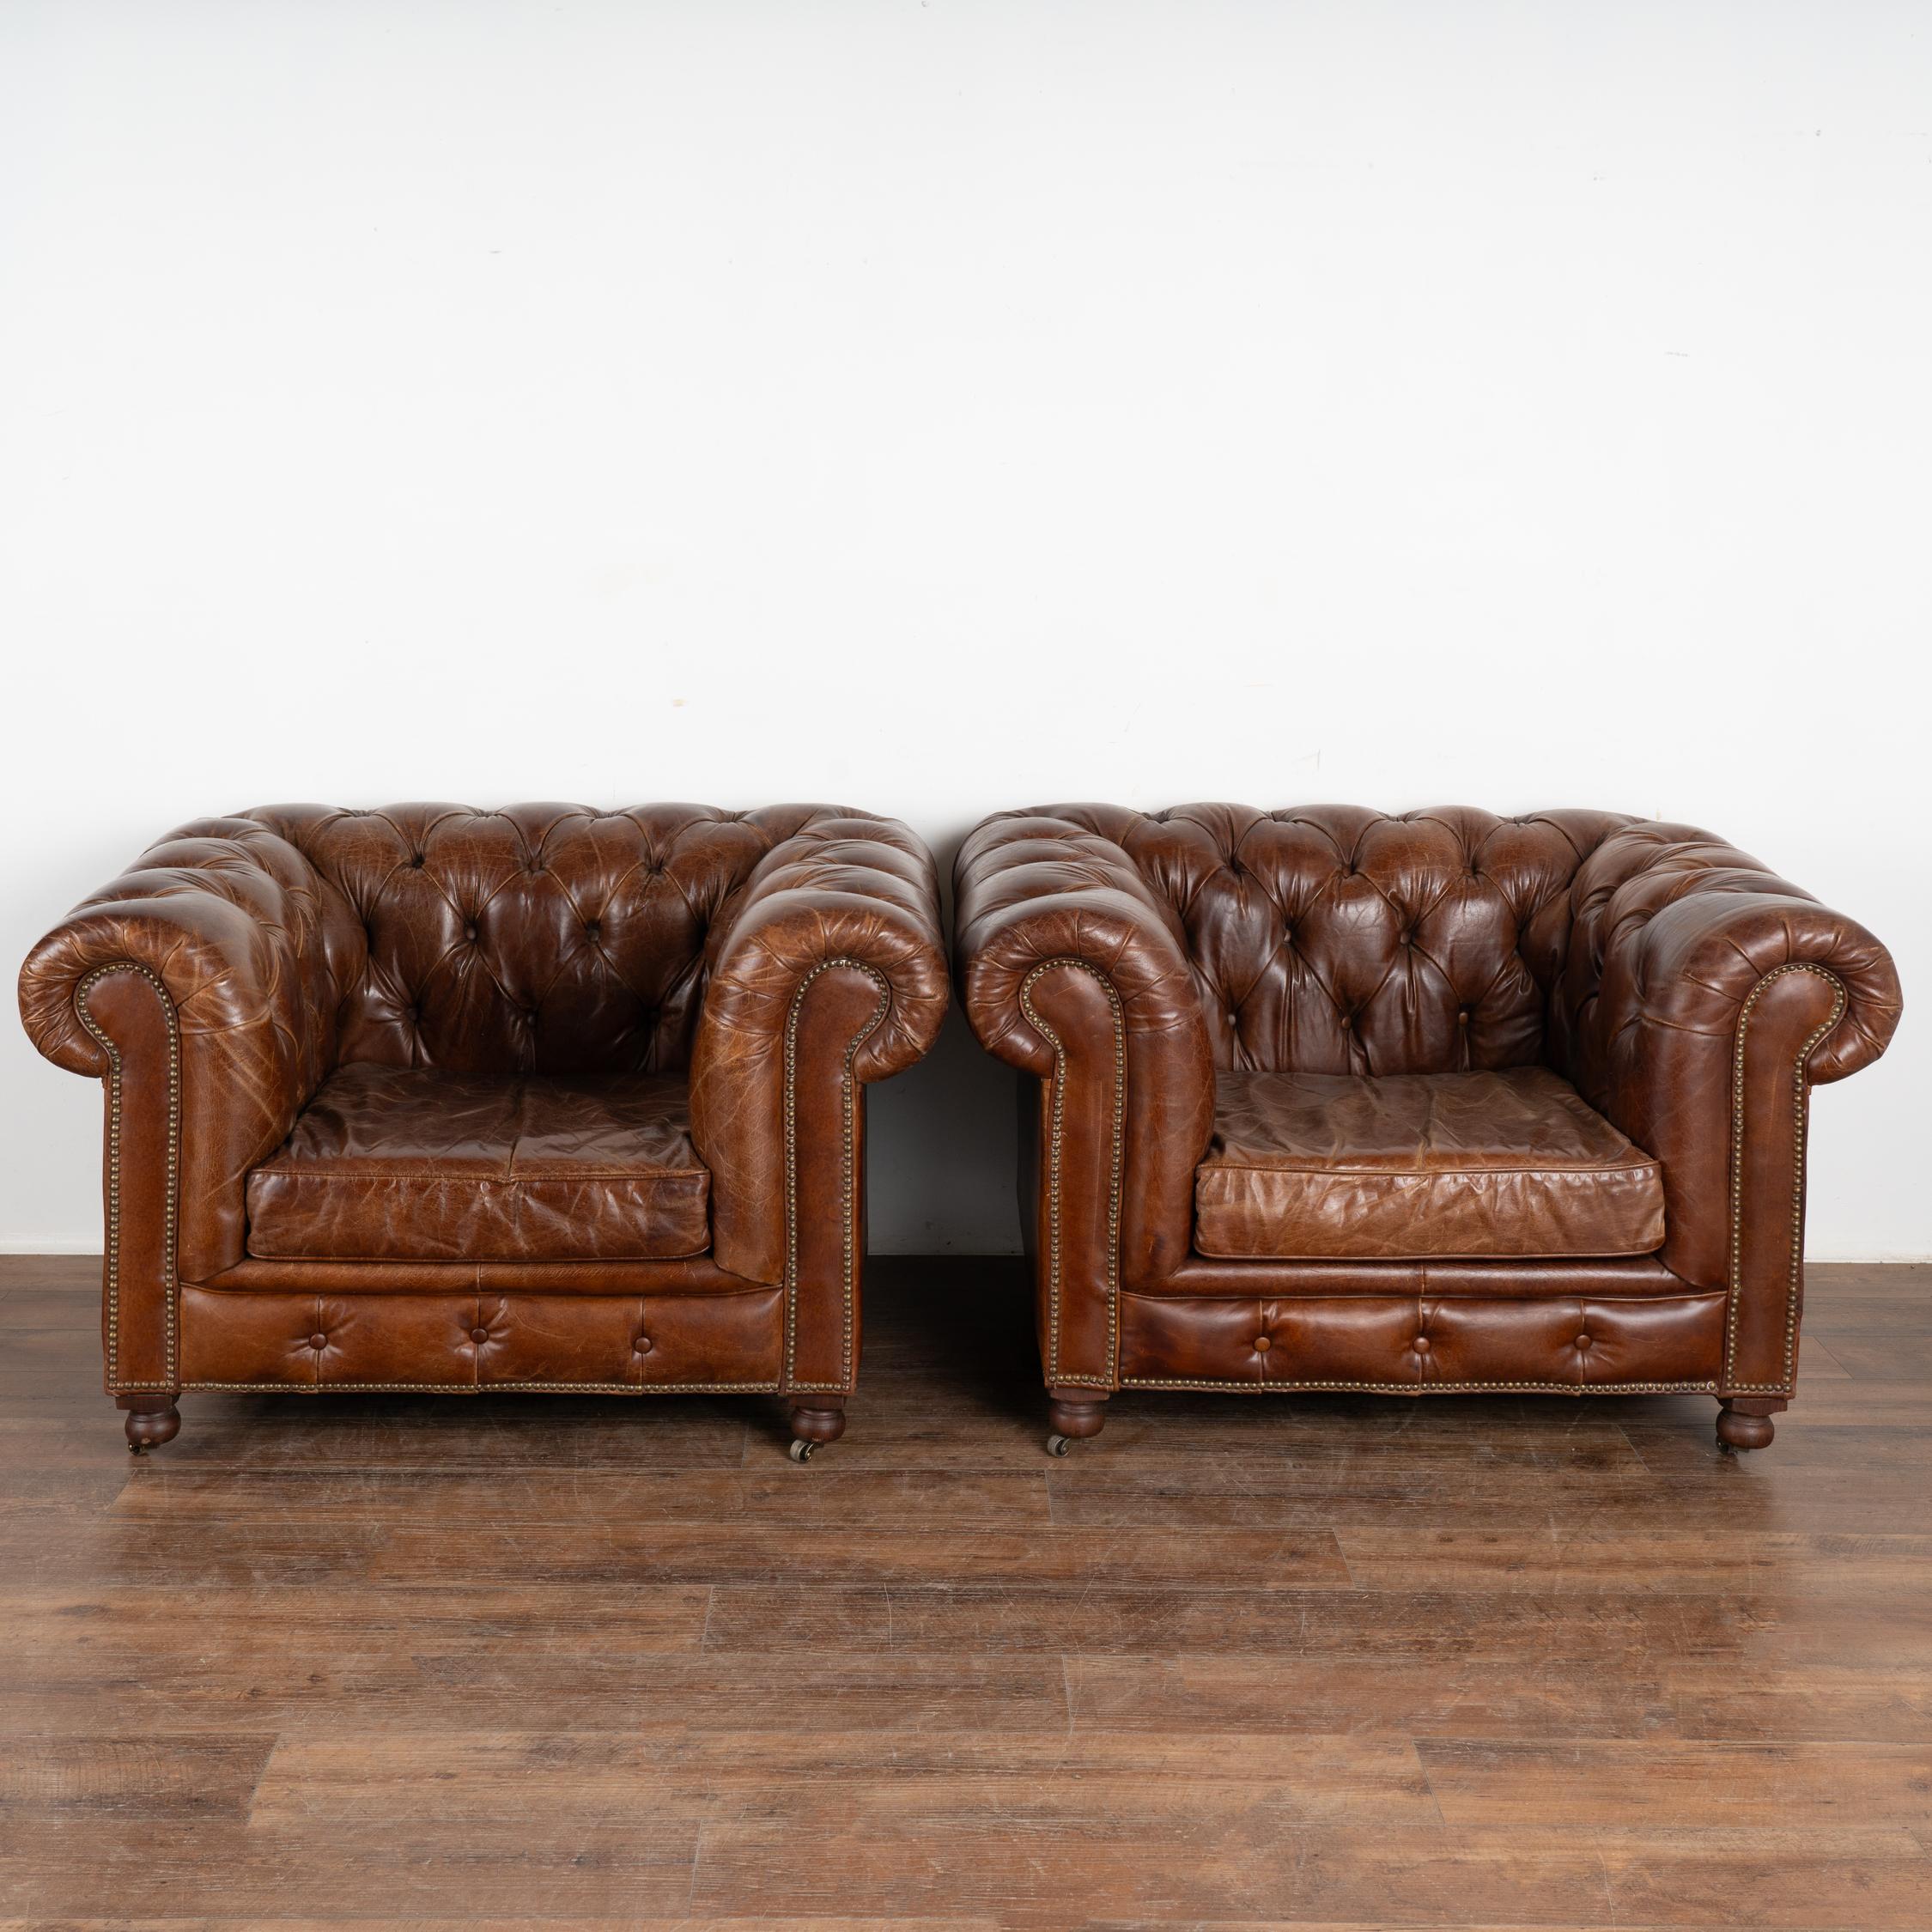 English Pair, Vintage Brown Leather Chesterfield Club Arm Chairs, England circa 1970-80